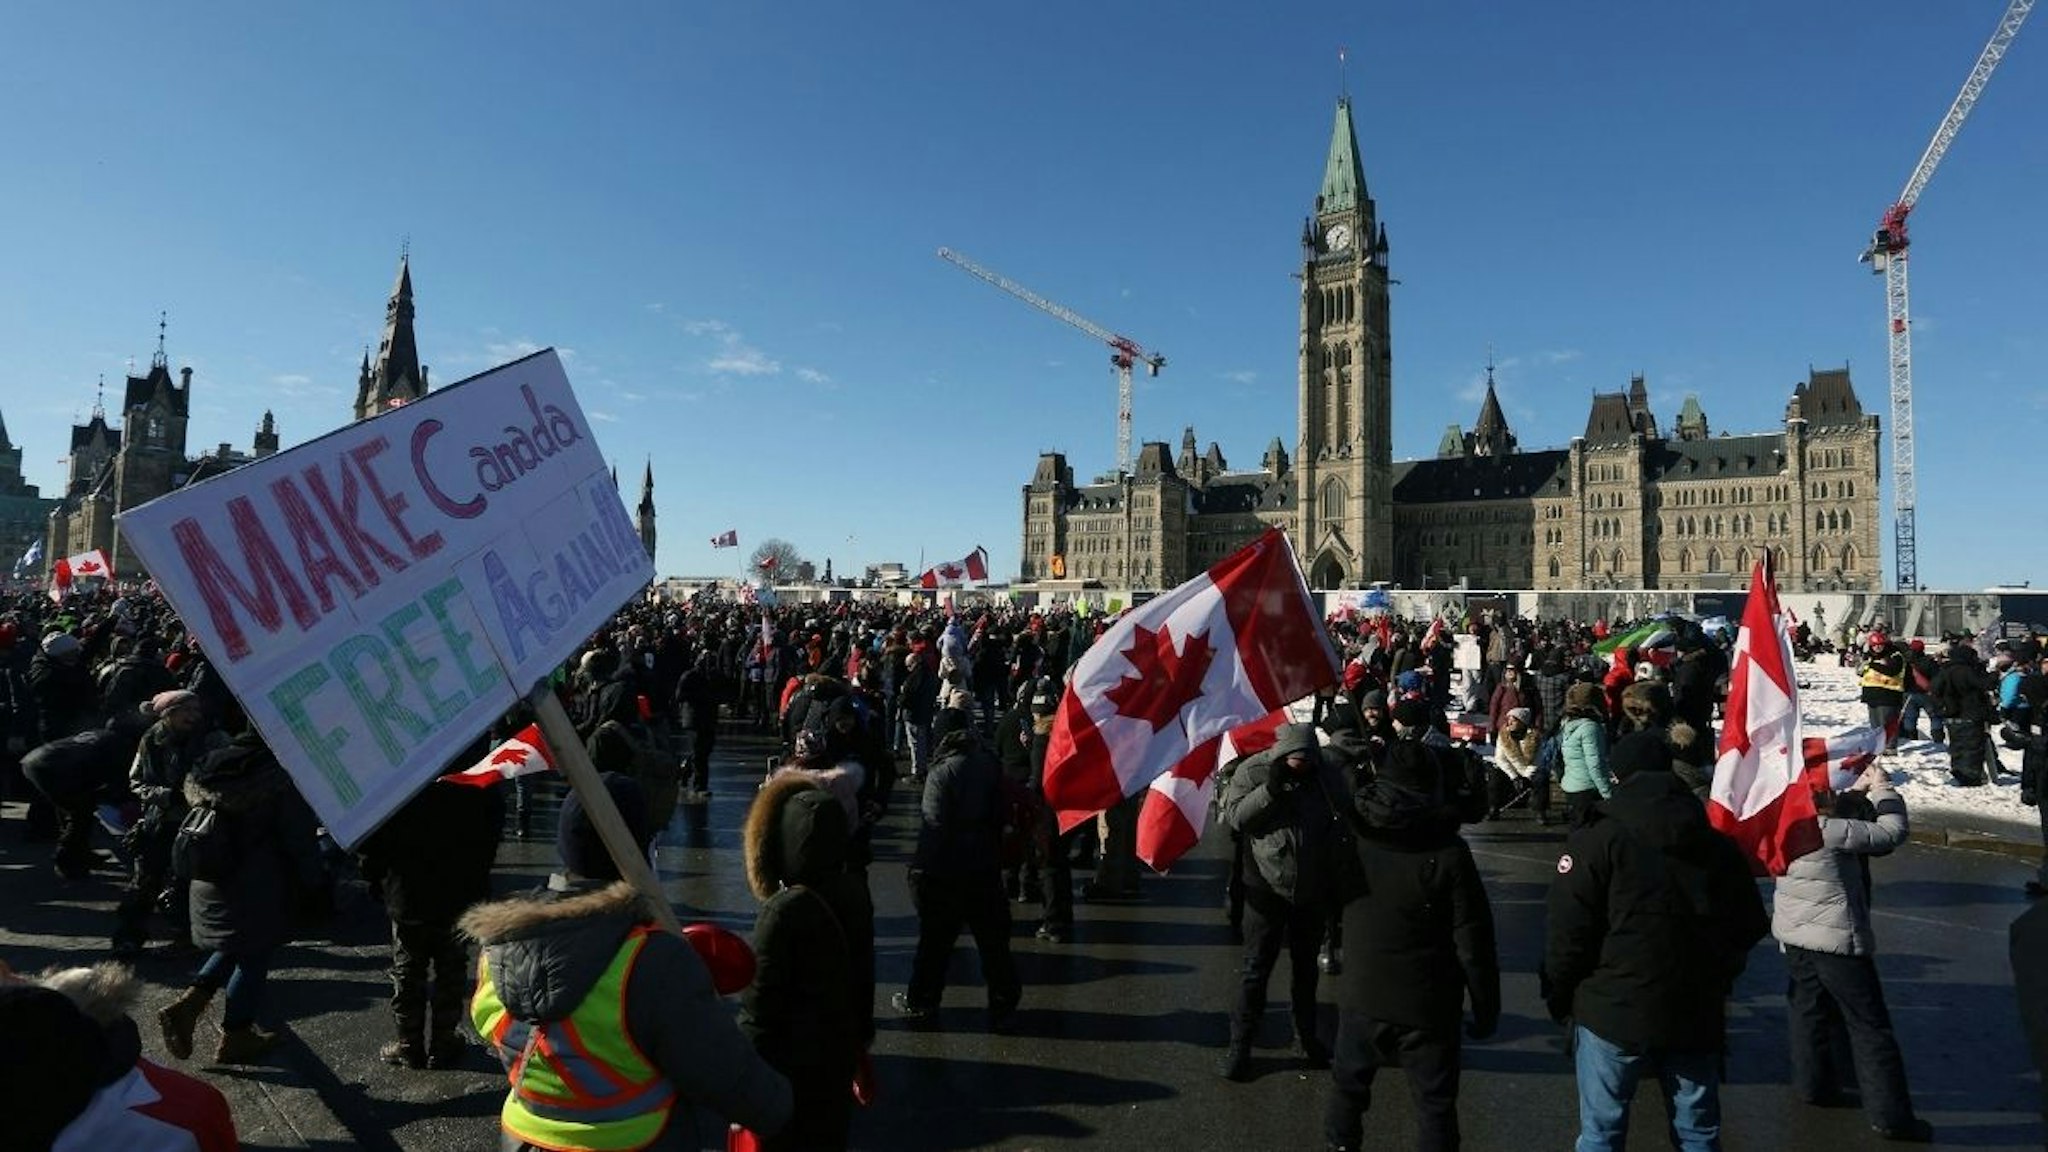 Supporters of the Freedom Convoy protest Covid-19 vaccine mandates and restrictions in front of Parliament on January 29, 2022 in Ottawa, Canada.